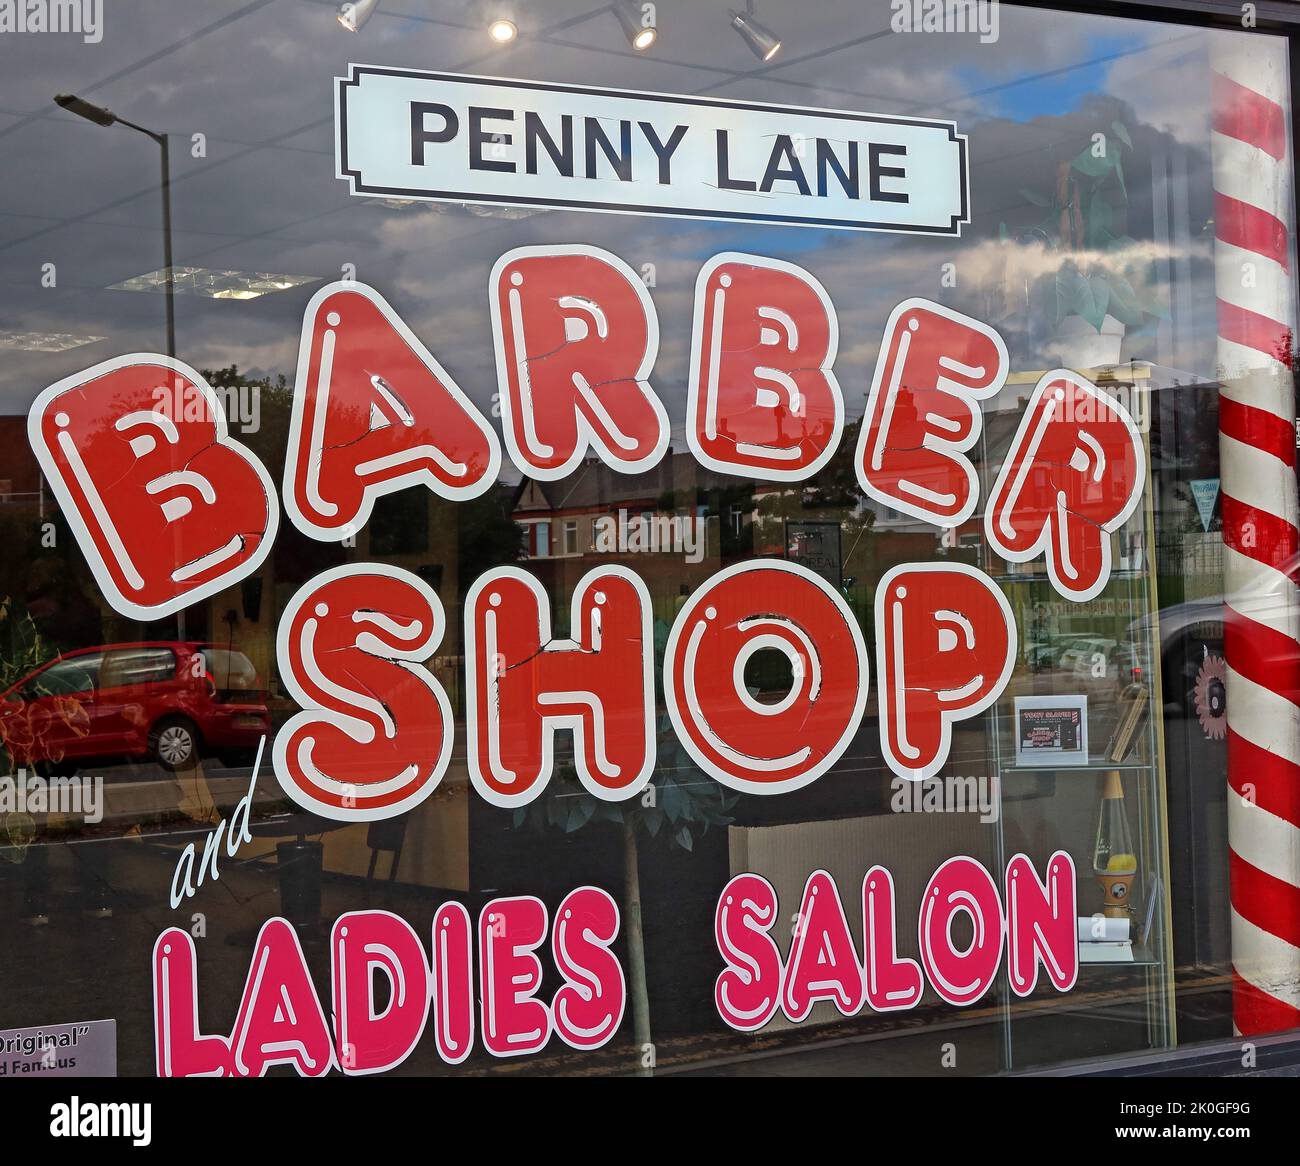 The Barber Shop, at the foot of Penny Lane, Tony Slavins, 11 Smithdown Pl, Liverpool, Merseyside, England,UK, L15 9EH Stock Photo